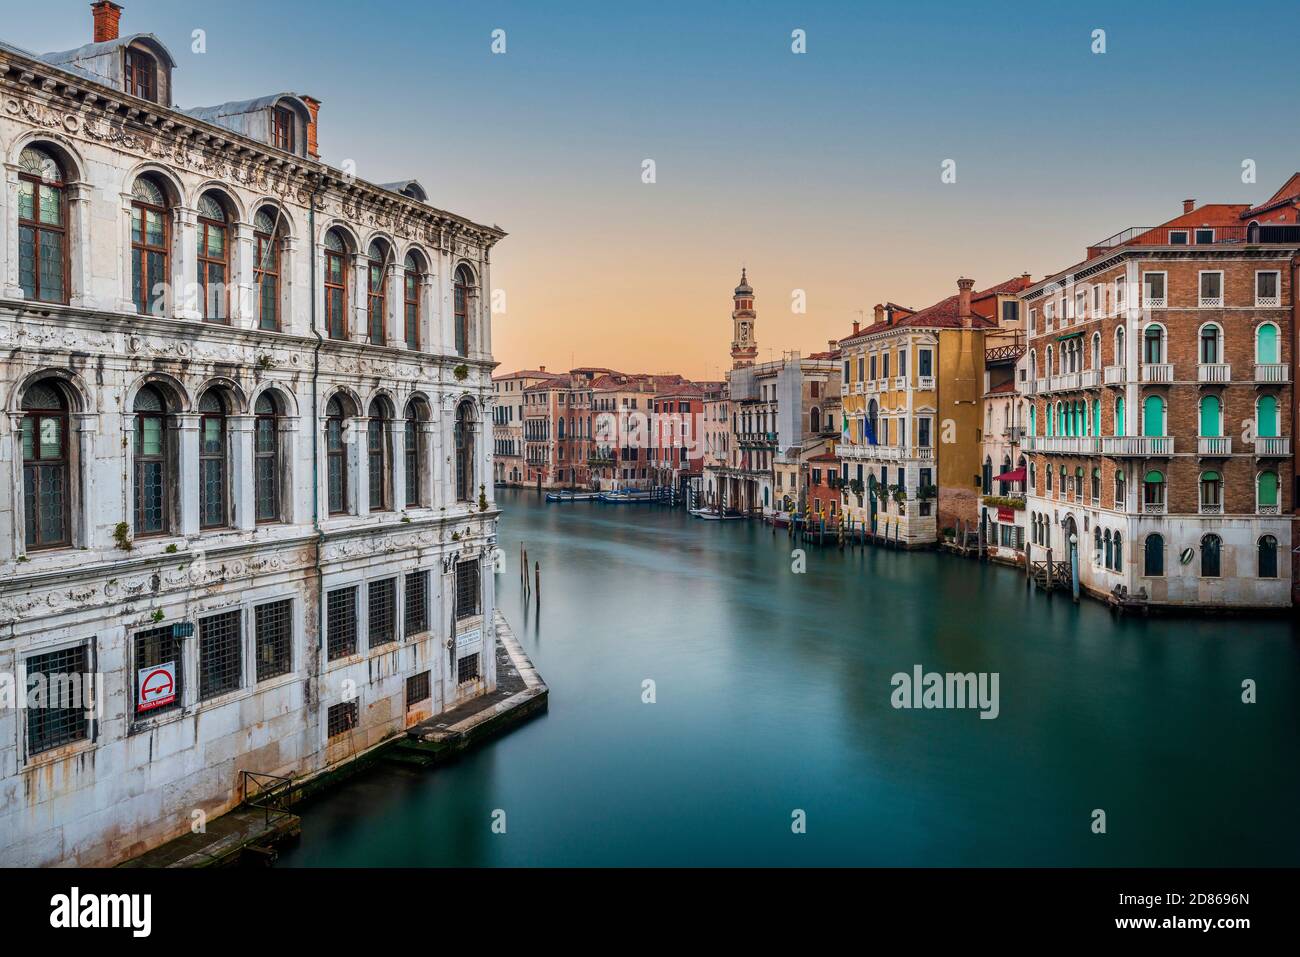 View of Grand Canal at sunset, Venice, Veneto, Italy Stock Photo